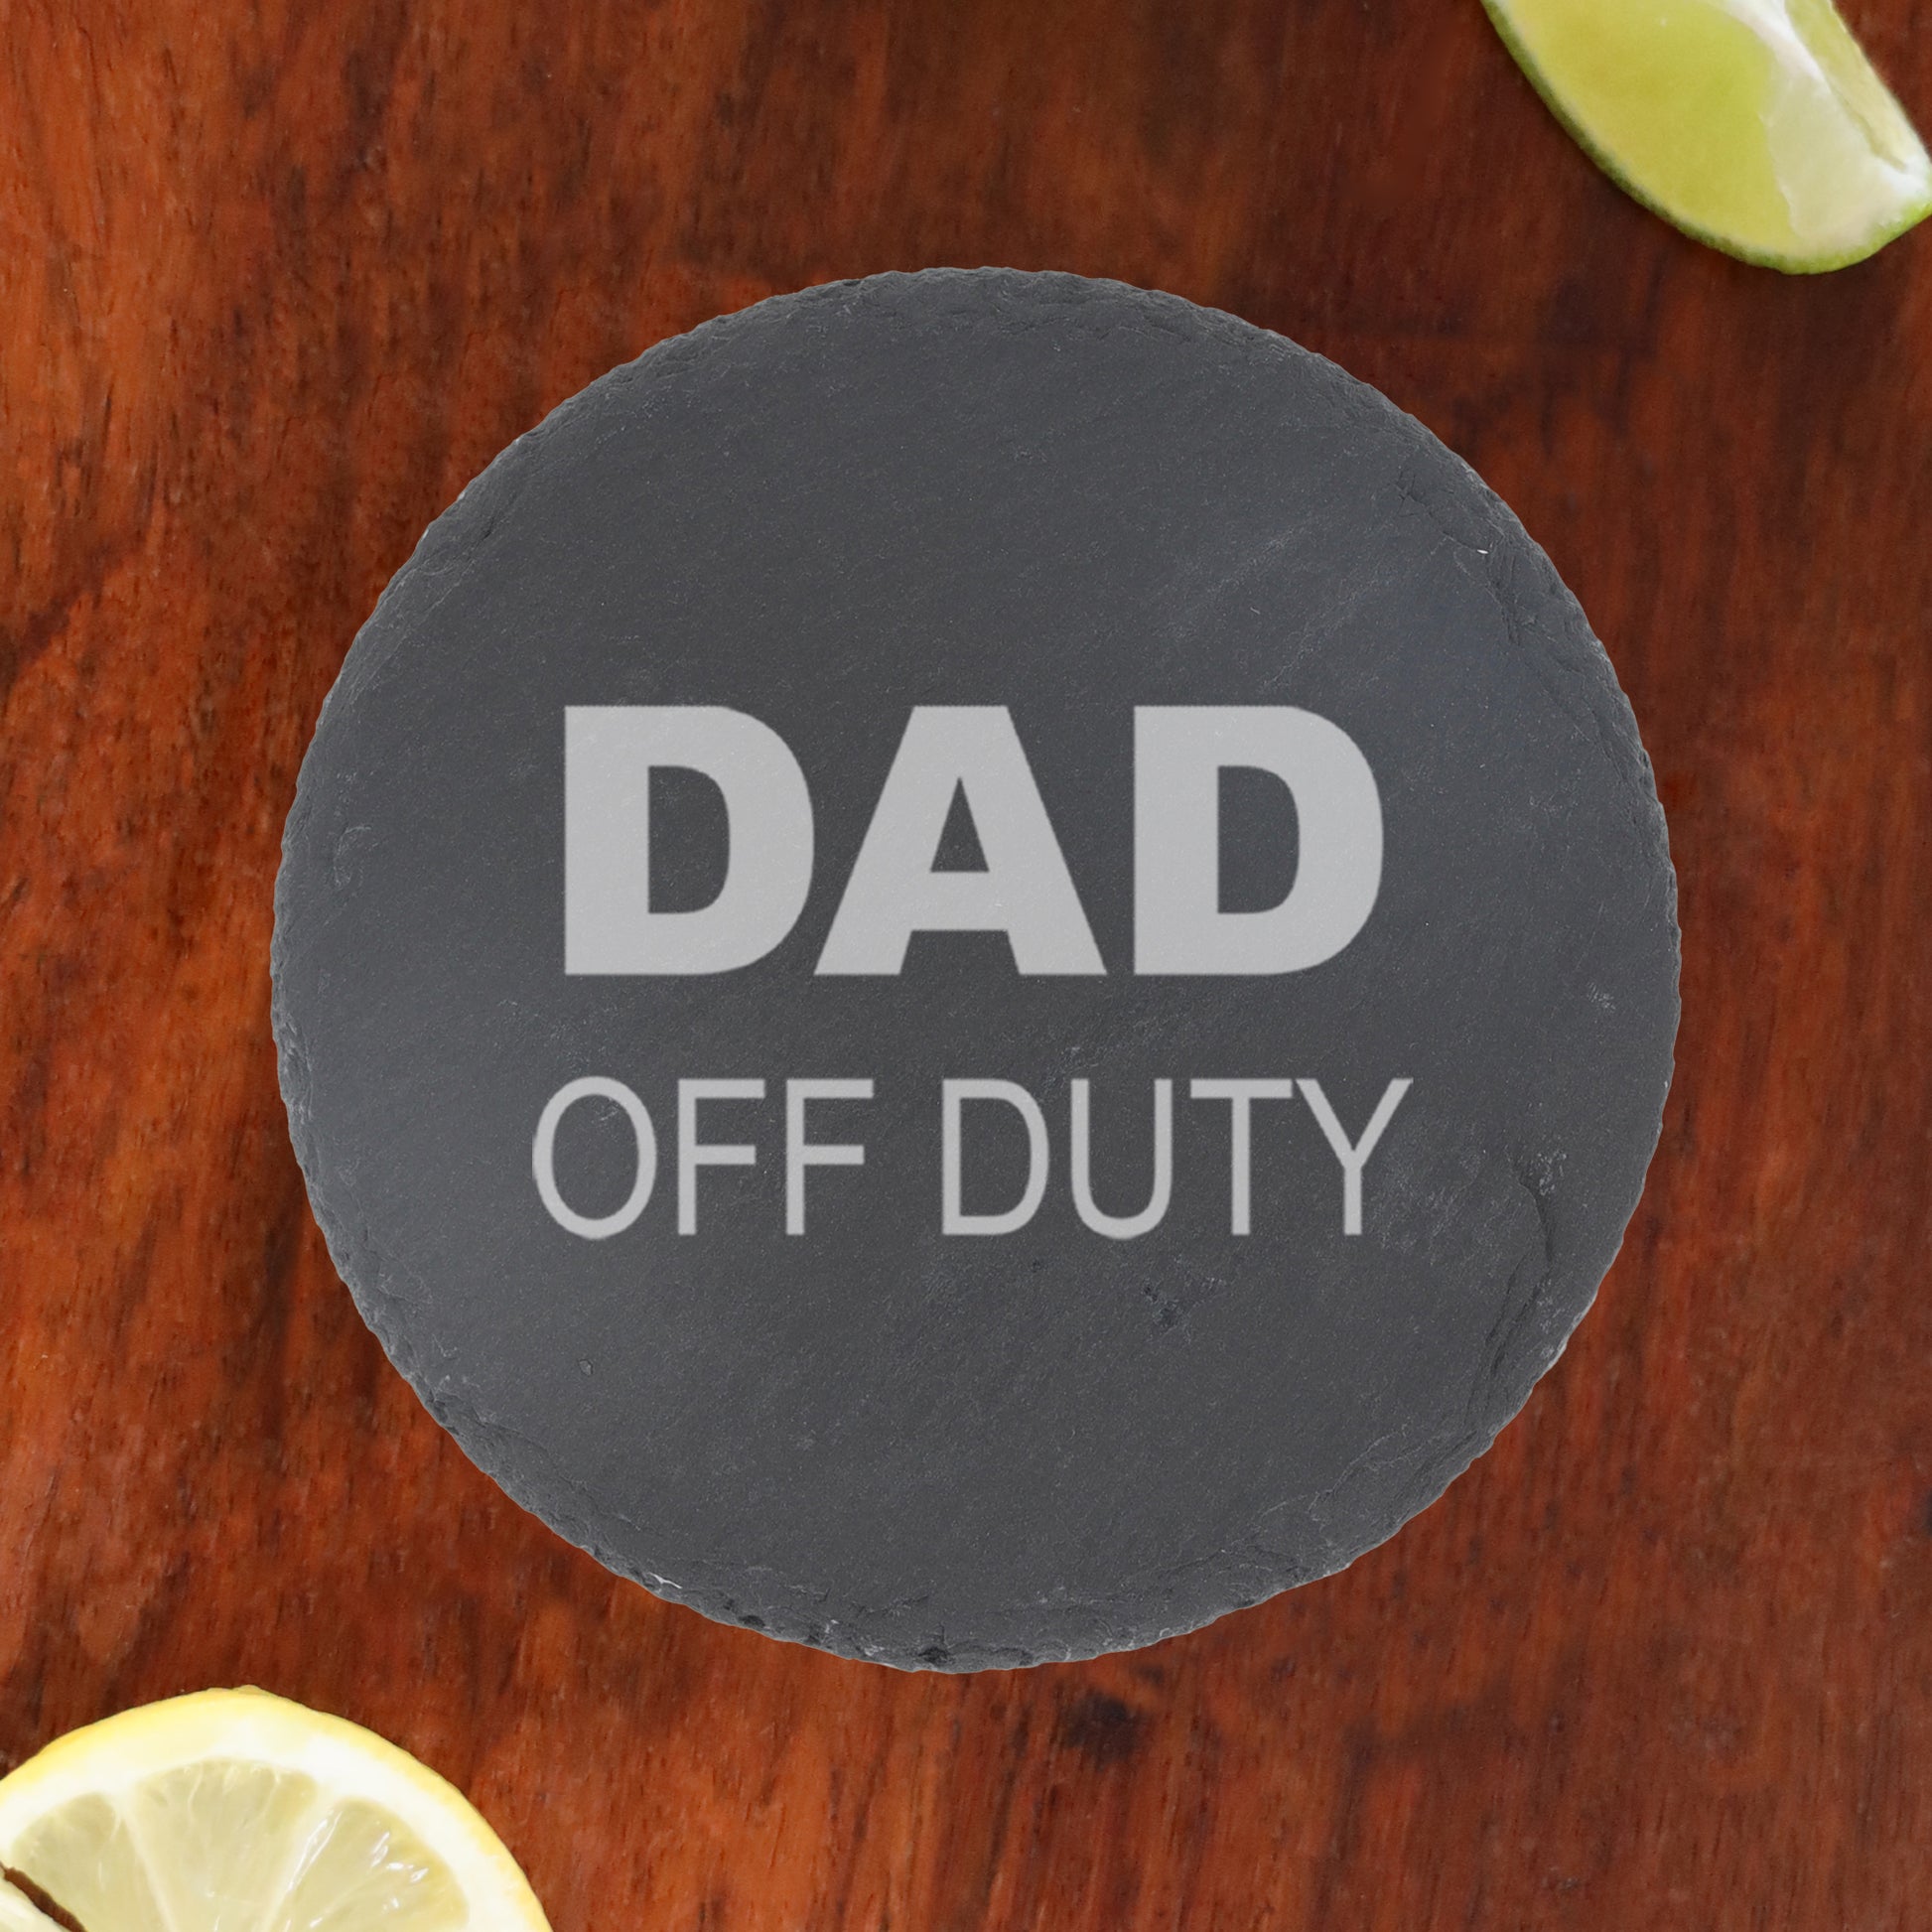 Engraved "Dad Off Duty" Novelty Wine Glass and/or Coaster Set  - Always Looking Good - Round Coaster Only  